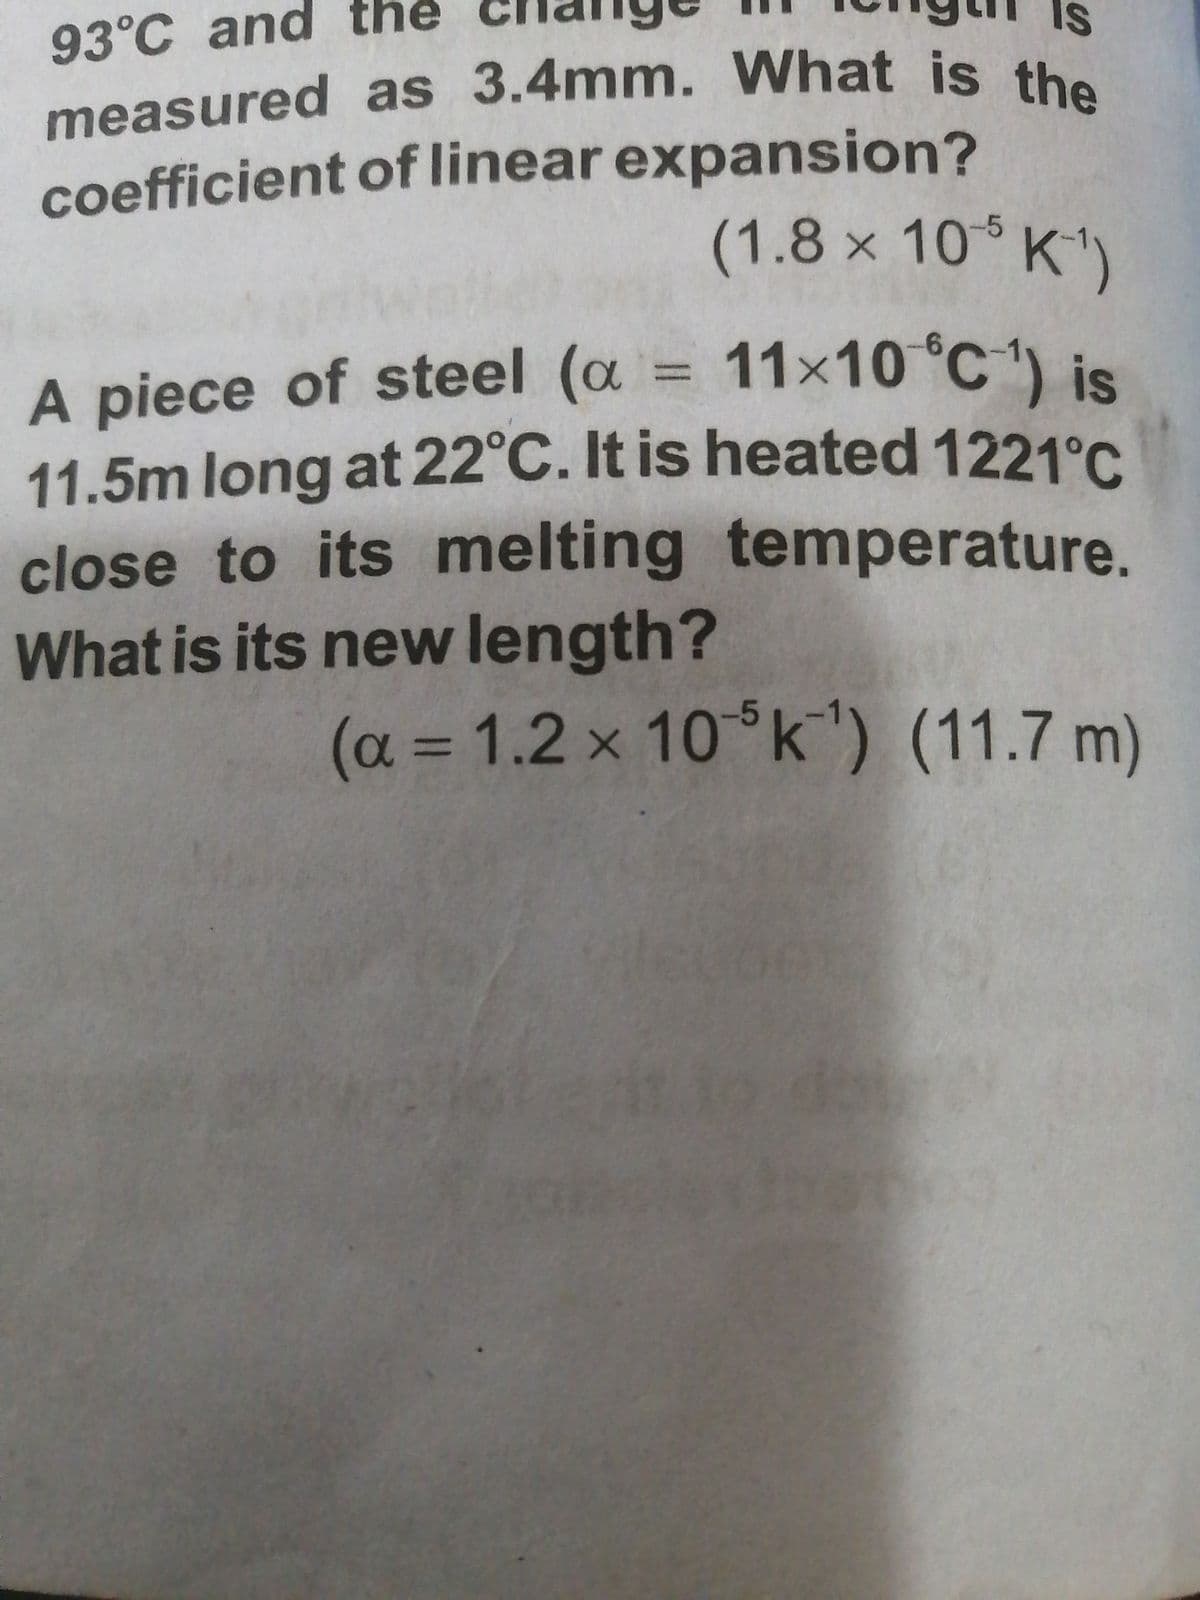 93°C and the
measured as 3.4mm. What is the
measured as 3.4mm. What is the
IS
coefficient of linear expansion?
(1.8x10%K1
A piece of steel (a = 11x10 °C) is
11.5m long at 22°C. It is heated 1221C
close to its melting temperature.
What is its new length?
%3D
(a = 1.2 x 10°k') (11.7 m)
-5
(11.7m)
